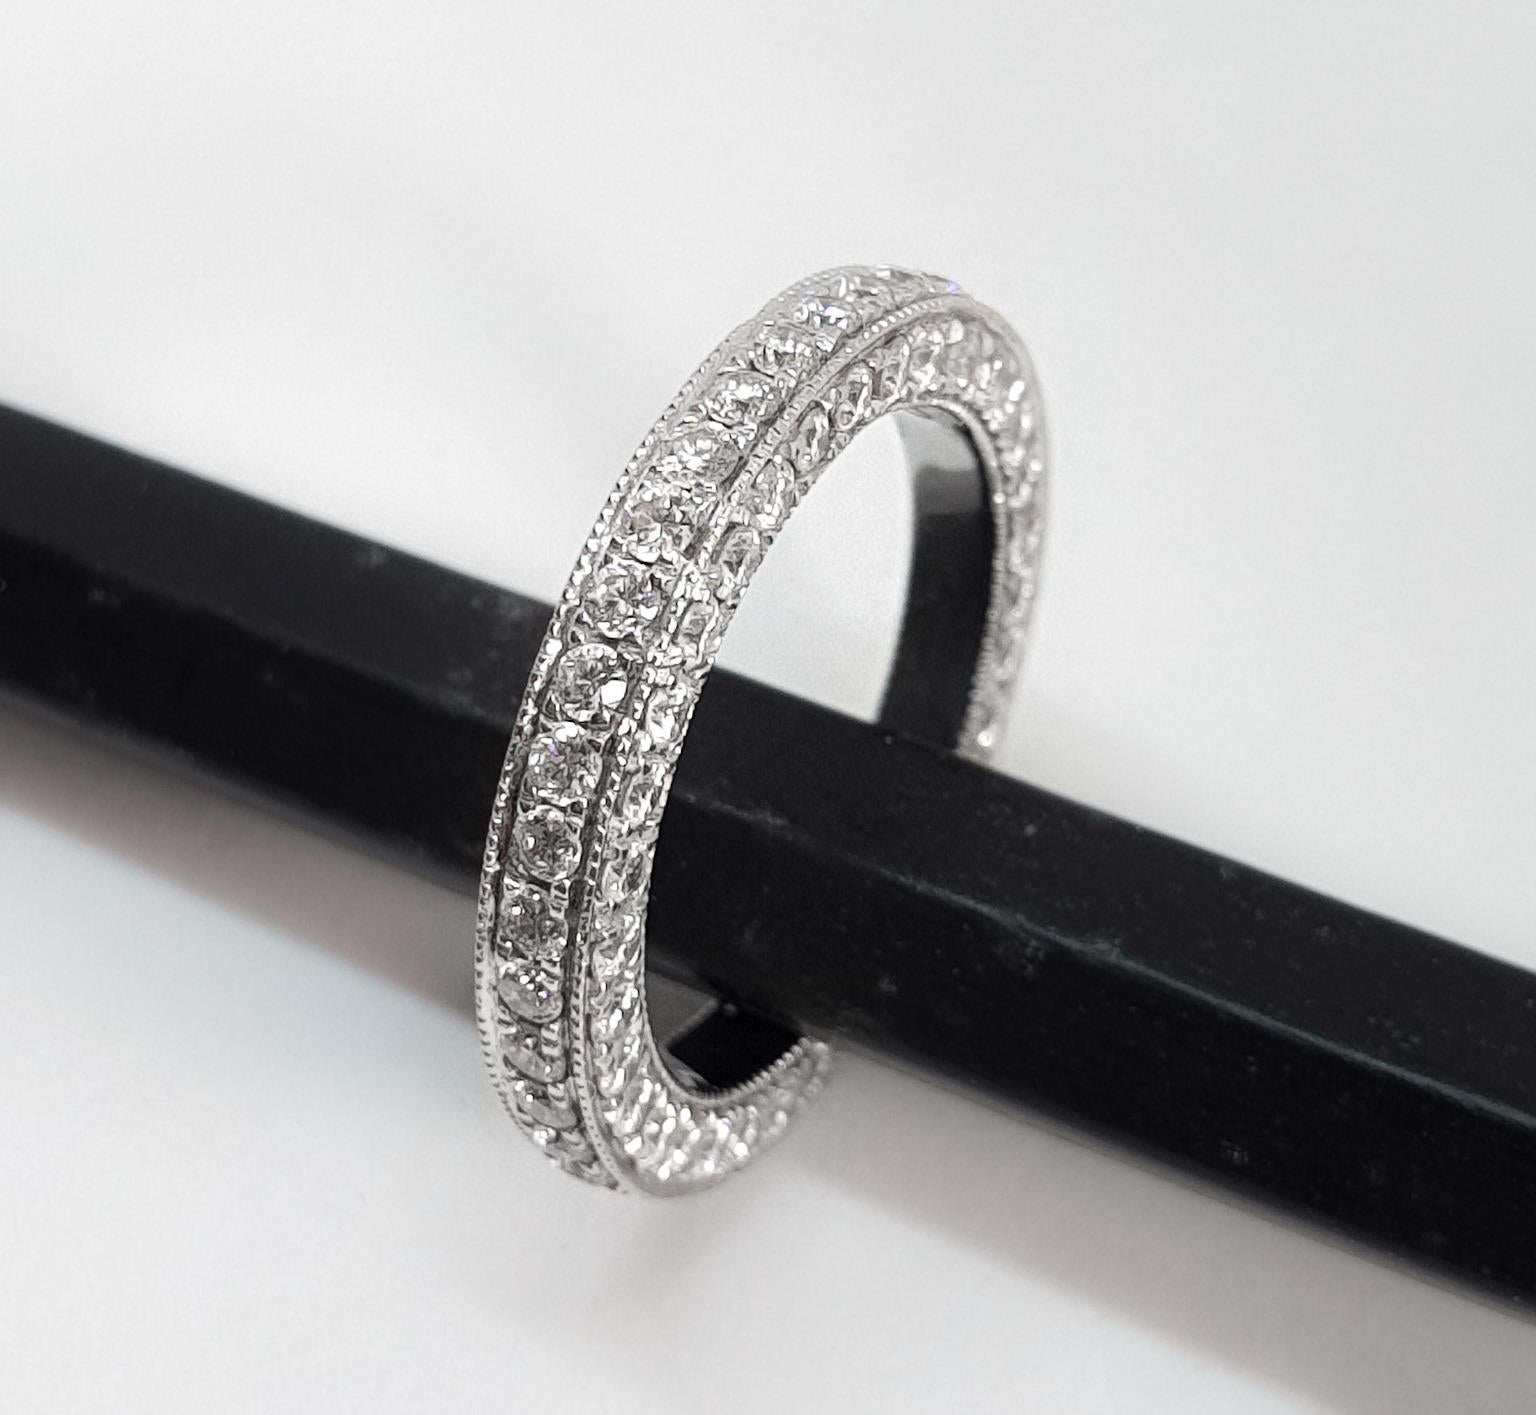 Inspired from the eternity band, this is a modified version of the same. Brilliant cut round diamonds are microscopically set on three sides of the band which are visually seen. The millgrain on each border adds to the detail.
This ring would look